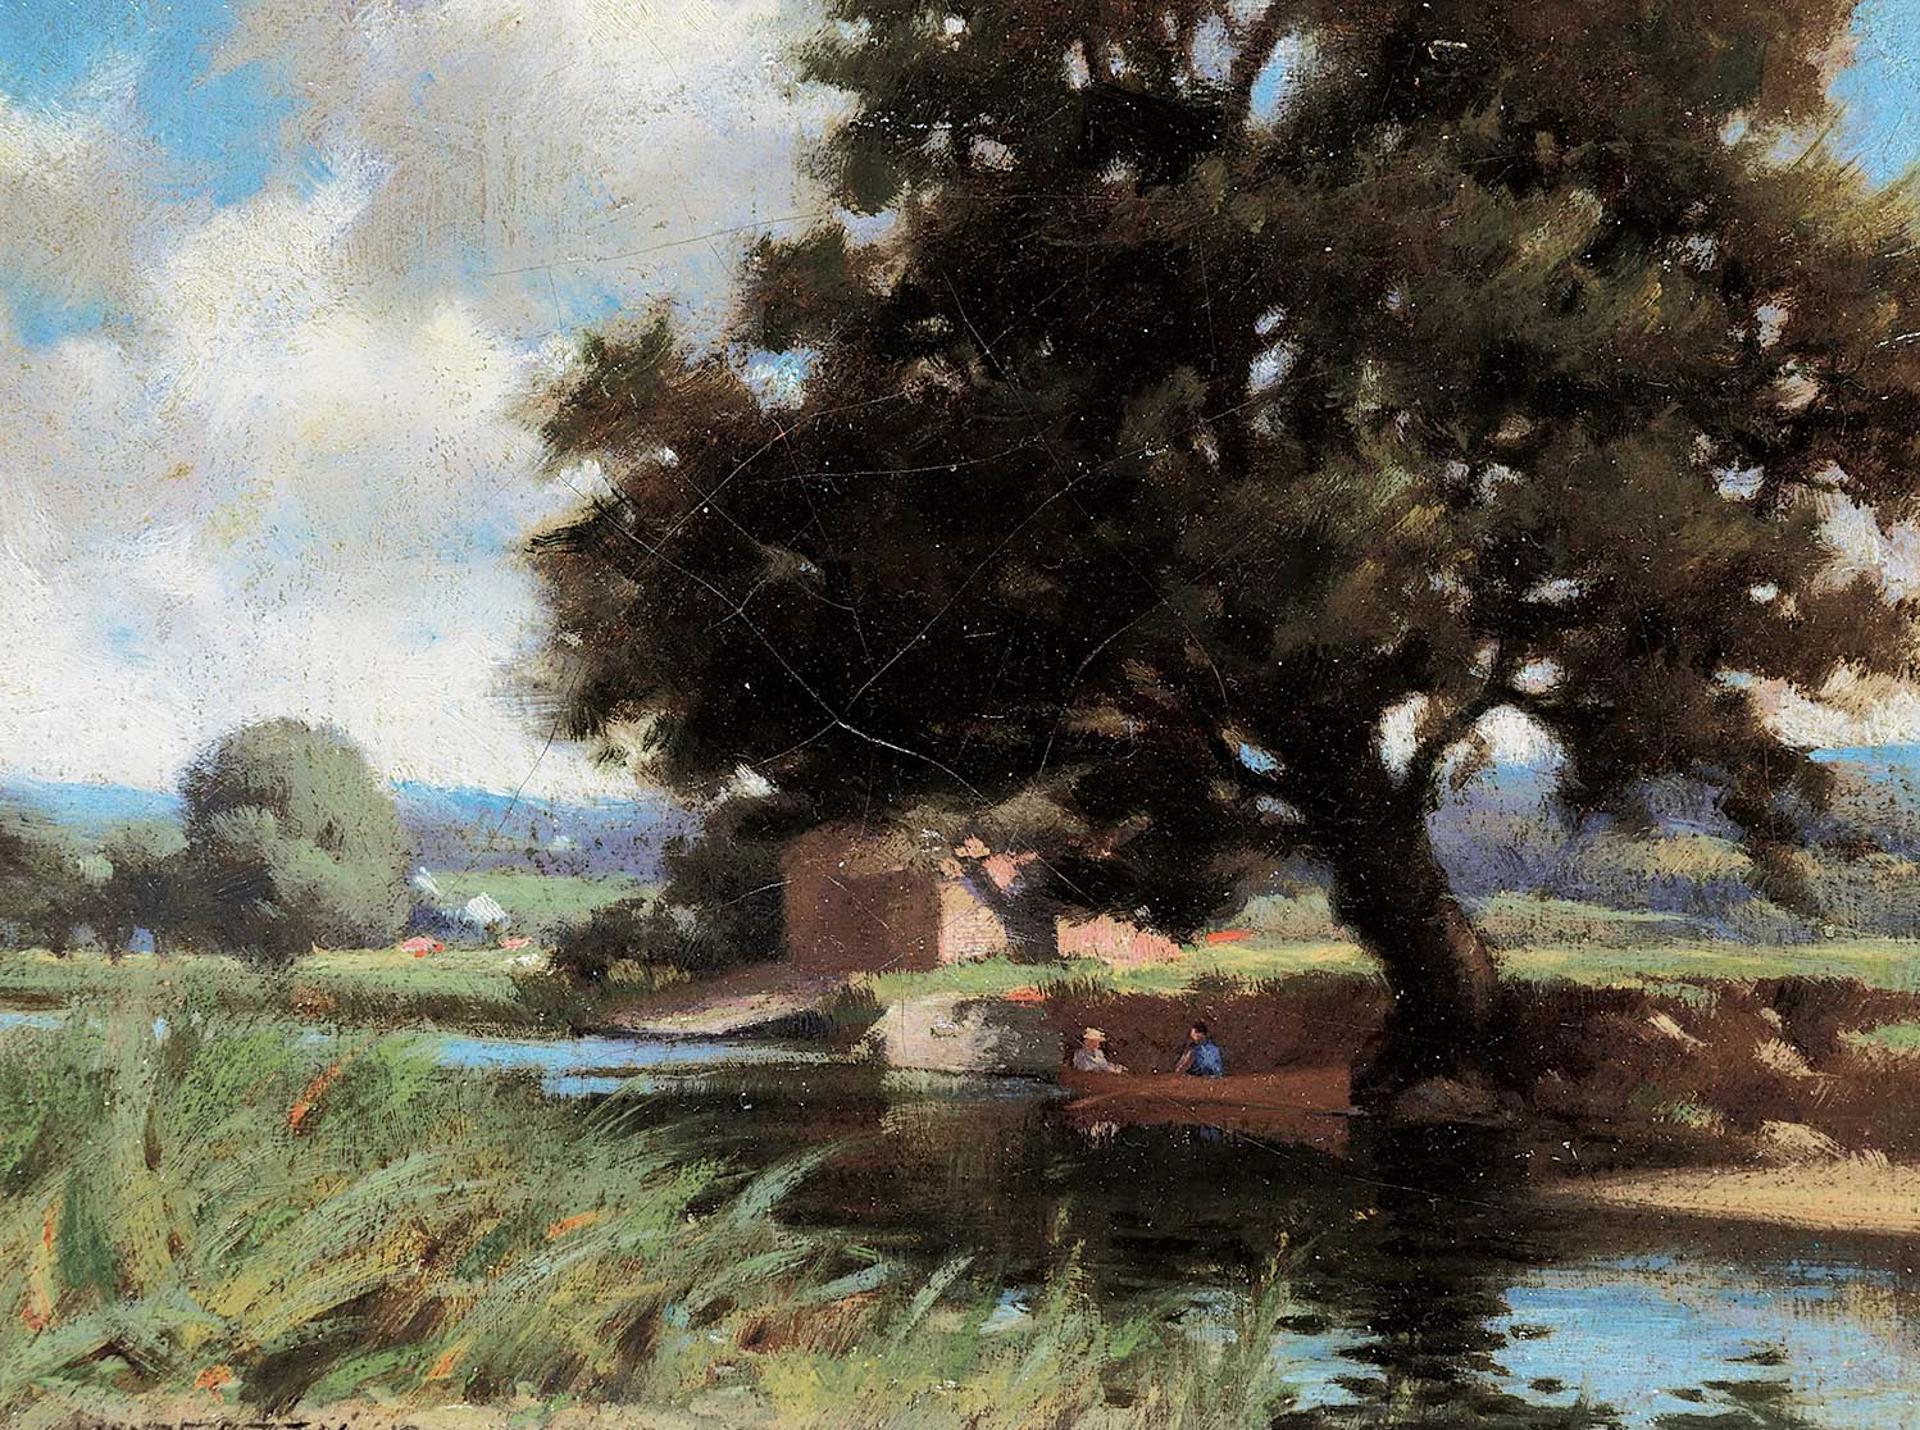 John William (J.W.) Beatty (1869-1941) - Untitled - Afternoon on the River